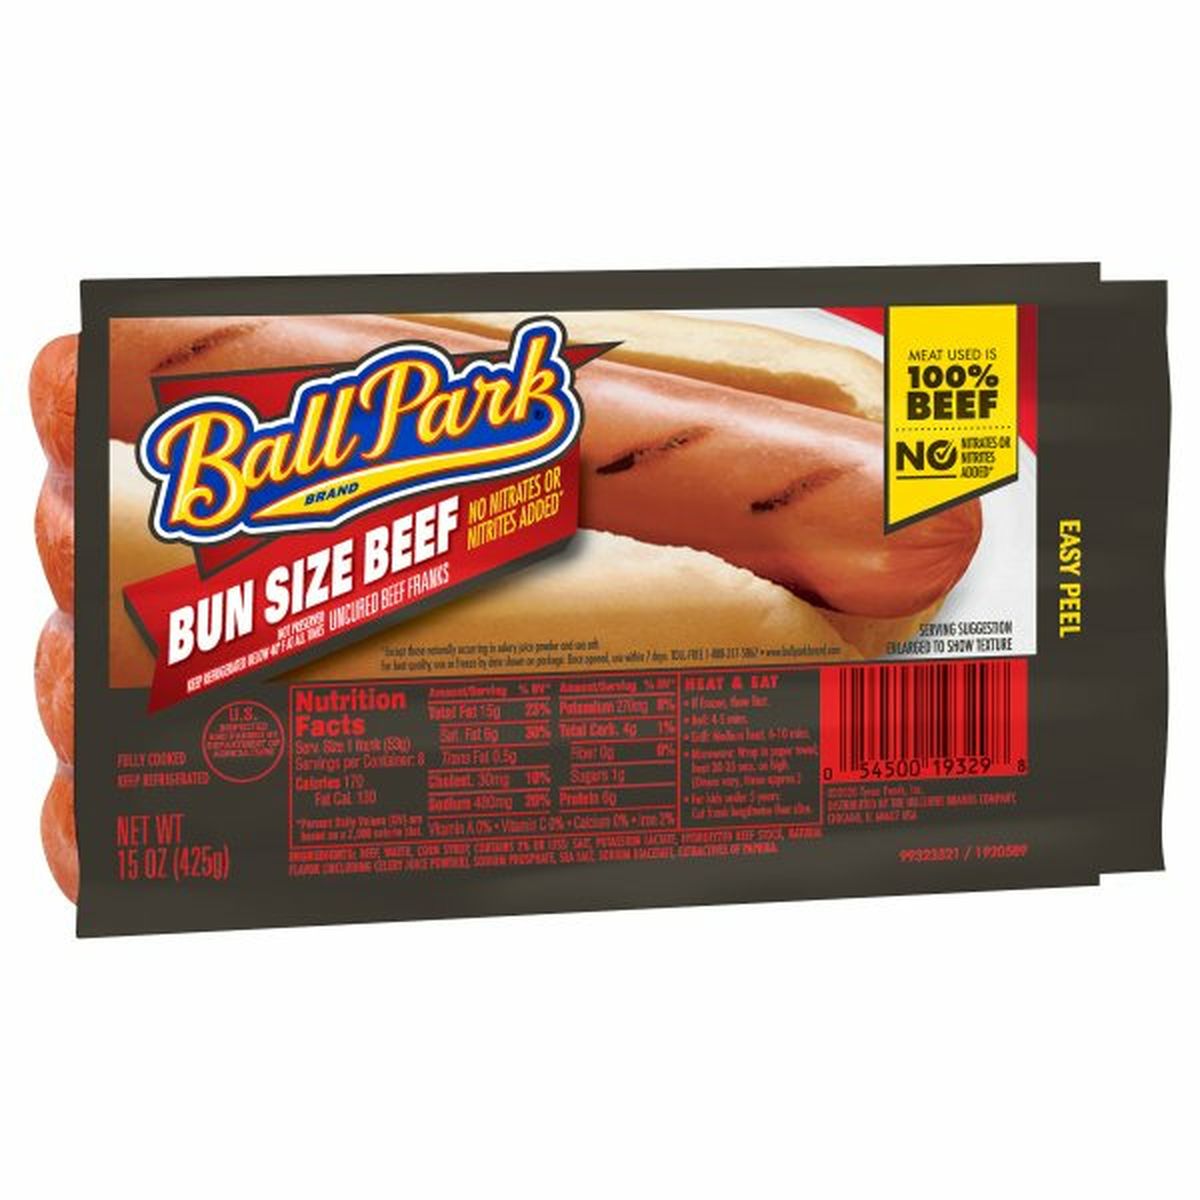 Calories in Ball Park Beef Hot Dogs, Bun Size Length, 8 Count